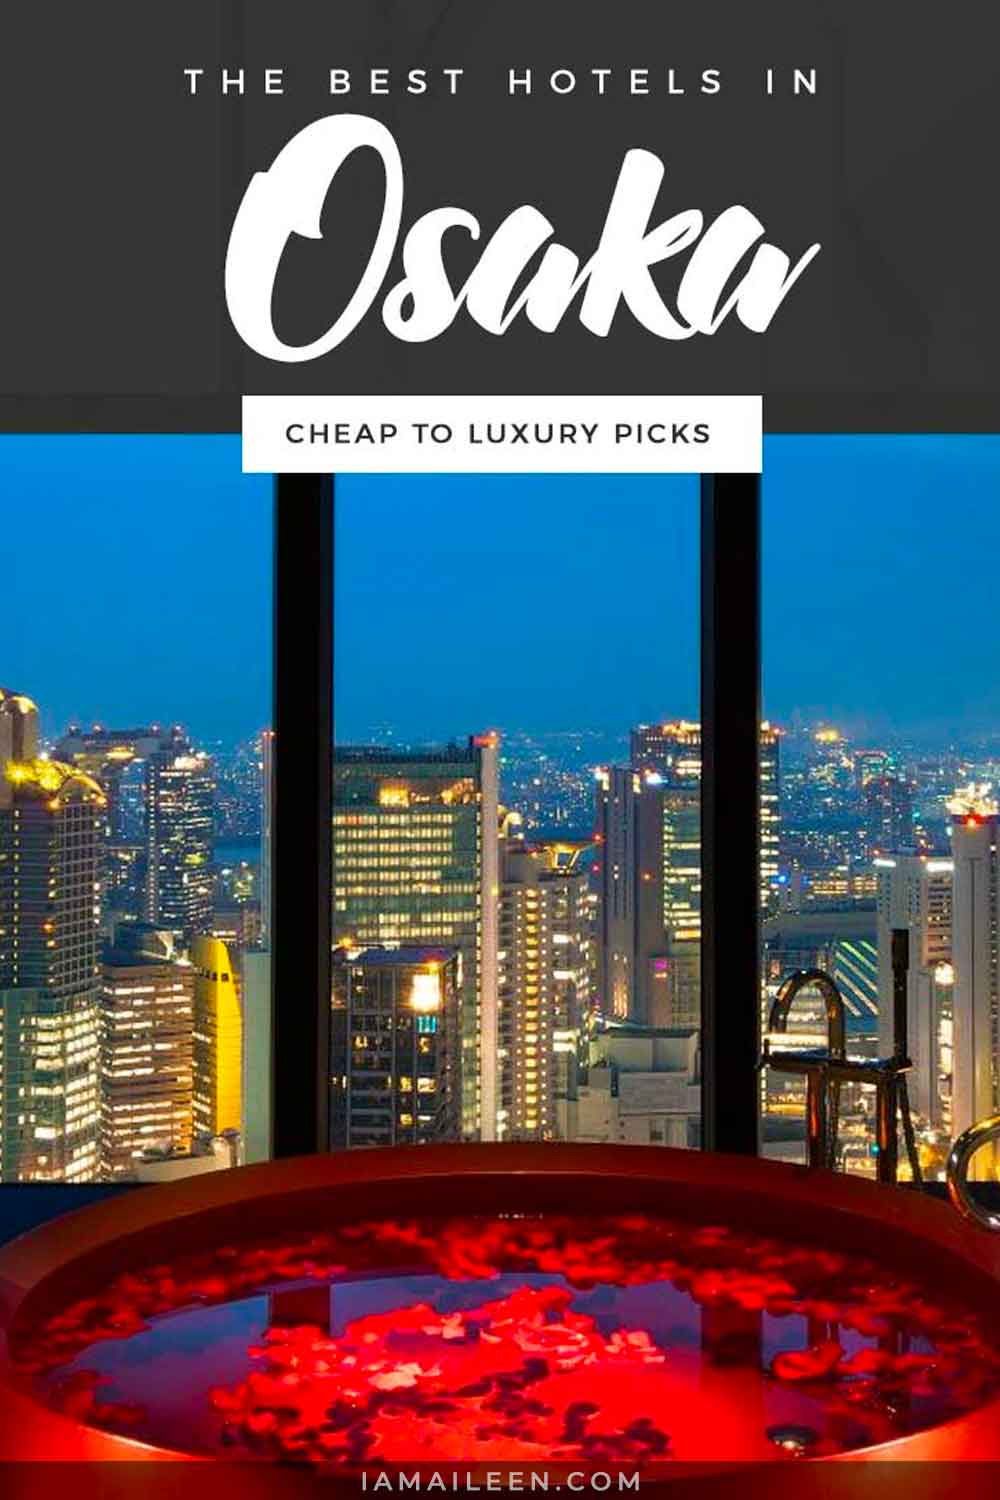 With an urban city like Osaka, it is expected that it is packed with tons of amazing accommodation choices and places to stay — HOWEVER, there are only a select few that can bring you the best value for your money and time. So hopefully with this list, I can help you make an informed decision for your upcoming staycation. Enjoy!